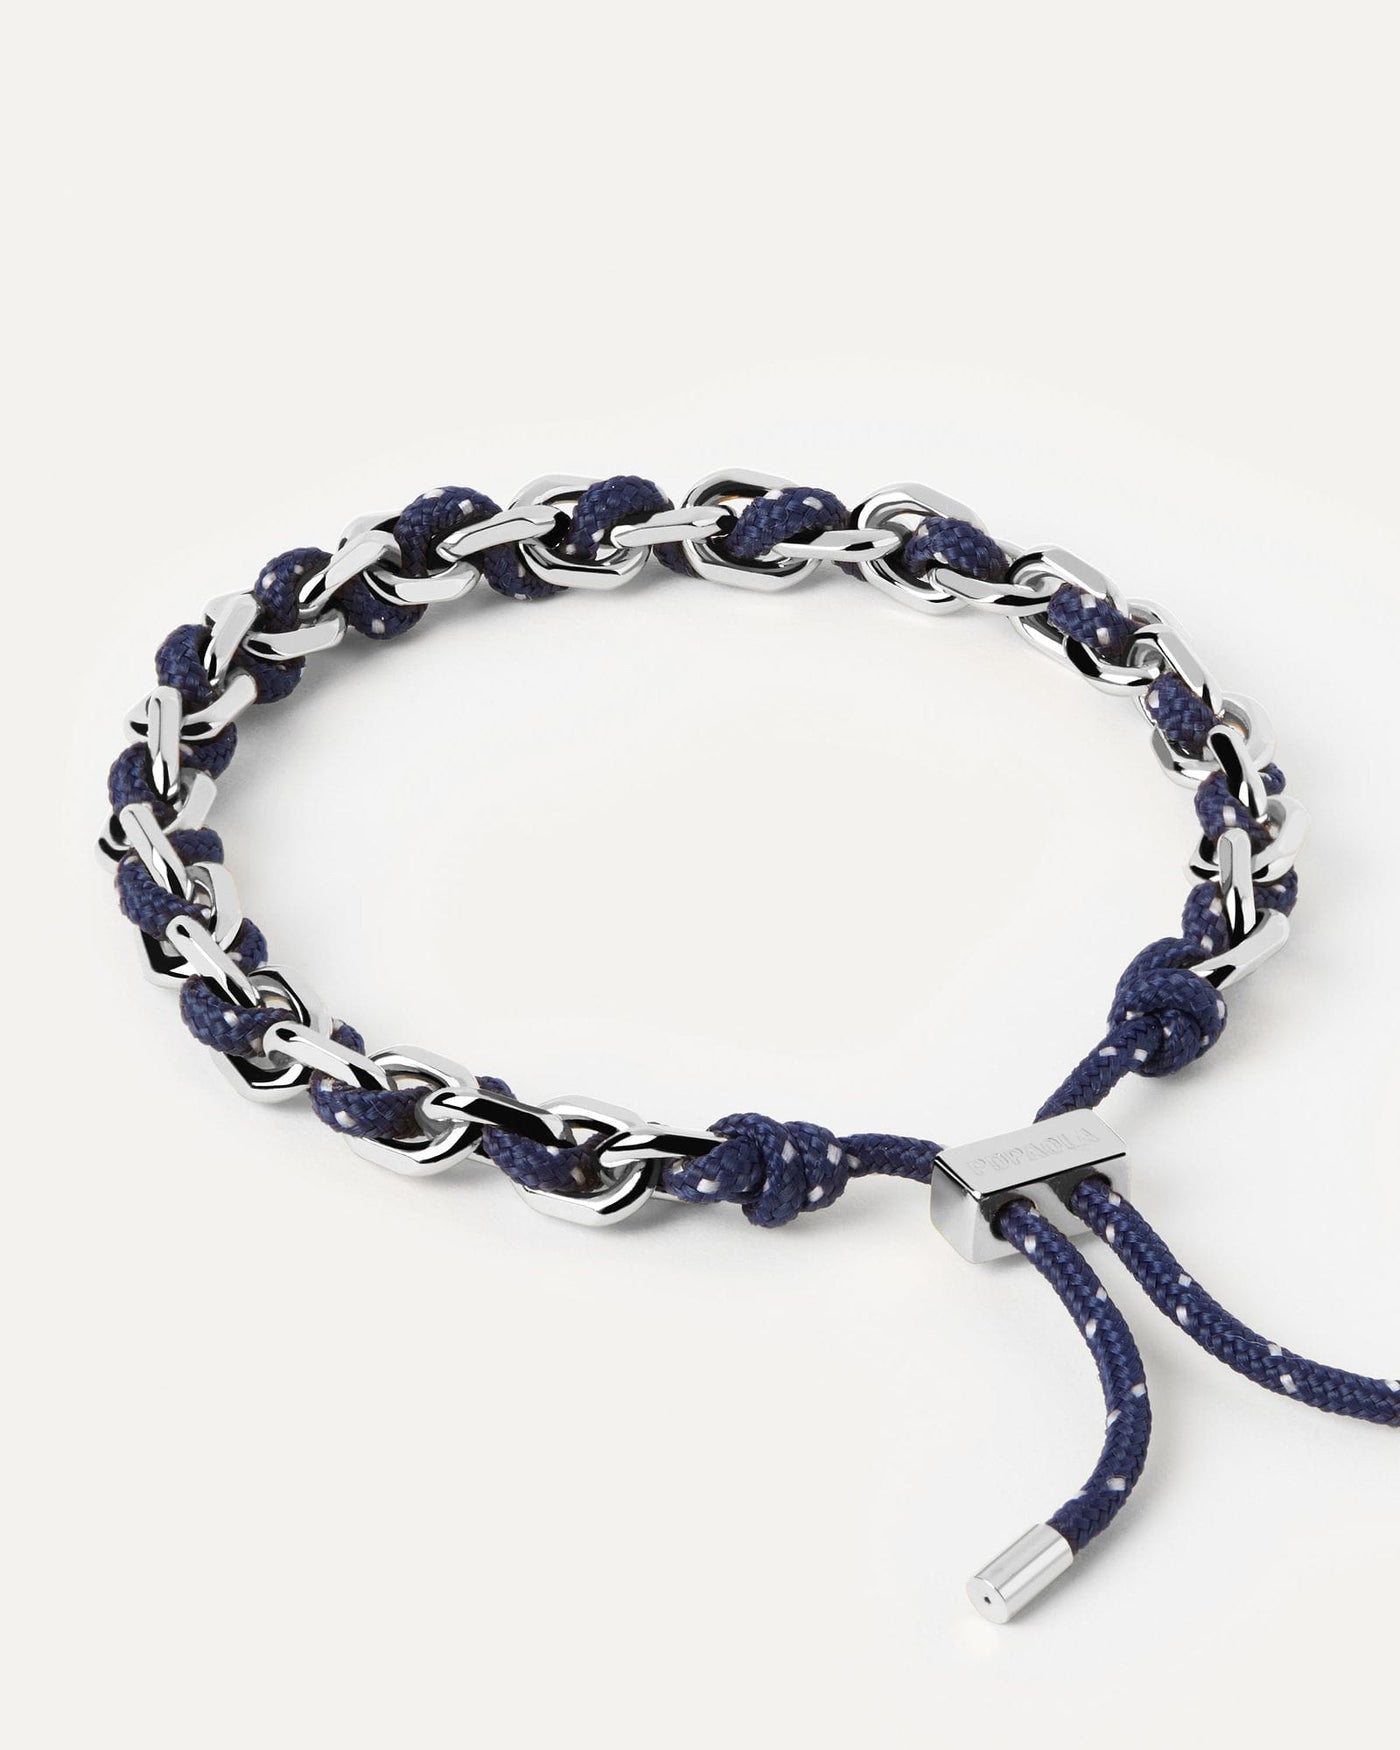 2024 Selection | Midnight Rope and Chain Silver Bracelet. Silver chain bracelet with a navy blue rope adjustable sliding clasp. Get the latest arrival from PDPAOLA. Place your order safely and get this Best Seller. Free Shipping.